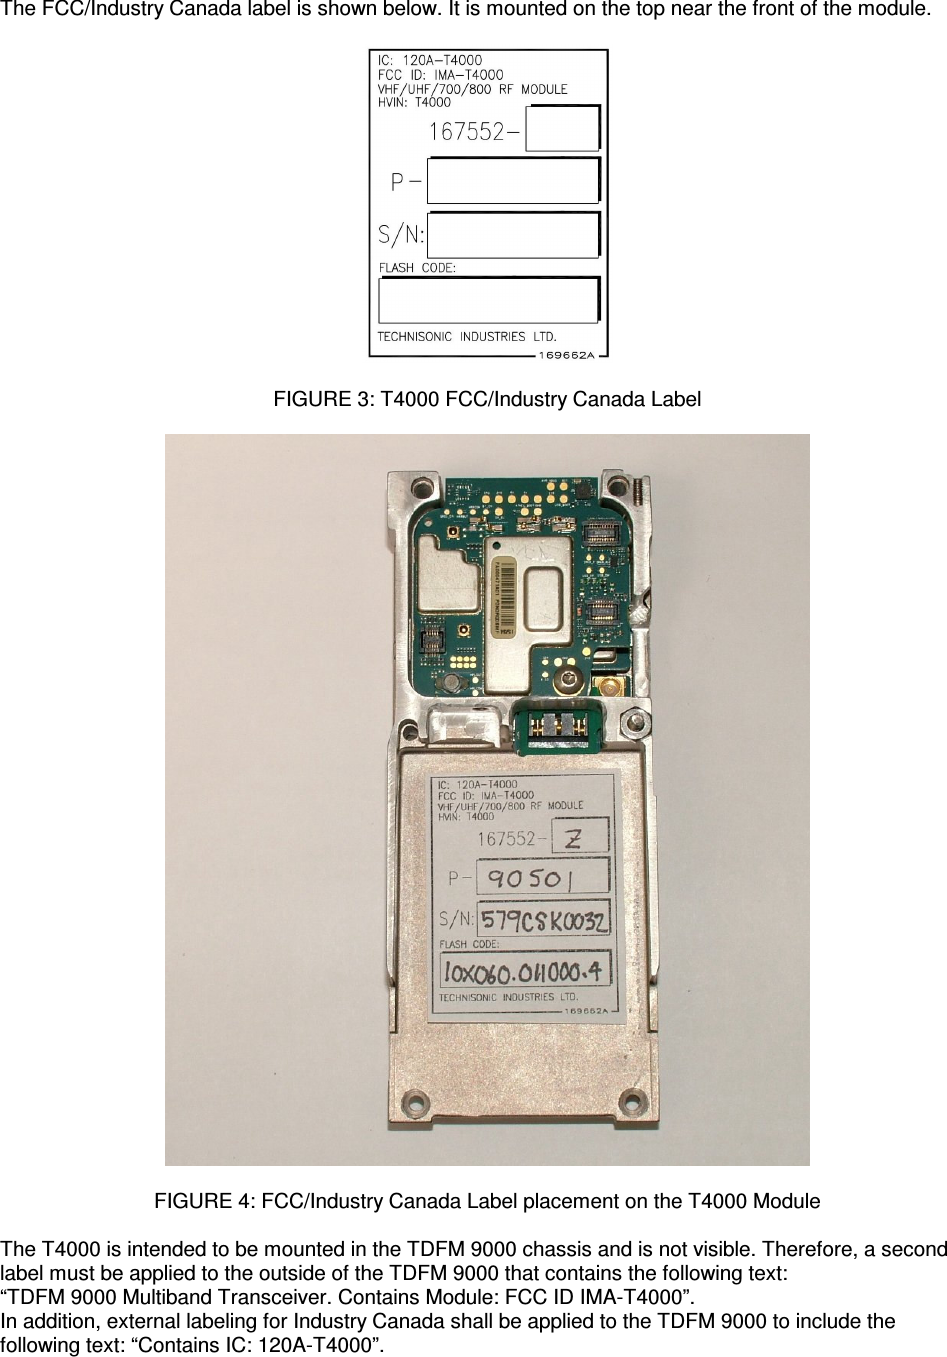    The FCC/Industry Canada label is shown below. It is mounted on the top near the front of the module.    FIGURE 3: T4000 FCC/Industry Canada Label    FIGURE 4: FCC/Industry Canada Label placement on the T4000 Module  The T4000 is intended to be mounted in the TDFM 9000 chassis and is not visible. Therefore, a second label must be applied to the outside of the TDFM 9000 that contains the following text: “TDFM 9000 Multiband Transceiver. Contains Module: FCC ID IMA-T4000”. In addition, external labeling for Industry Canada shall be applied to the TDFM 9000 to include the following text: “Contains IC: 120A-T4000”. 